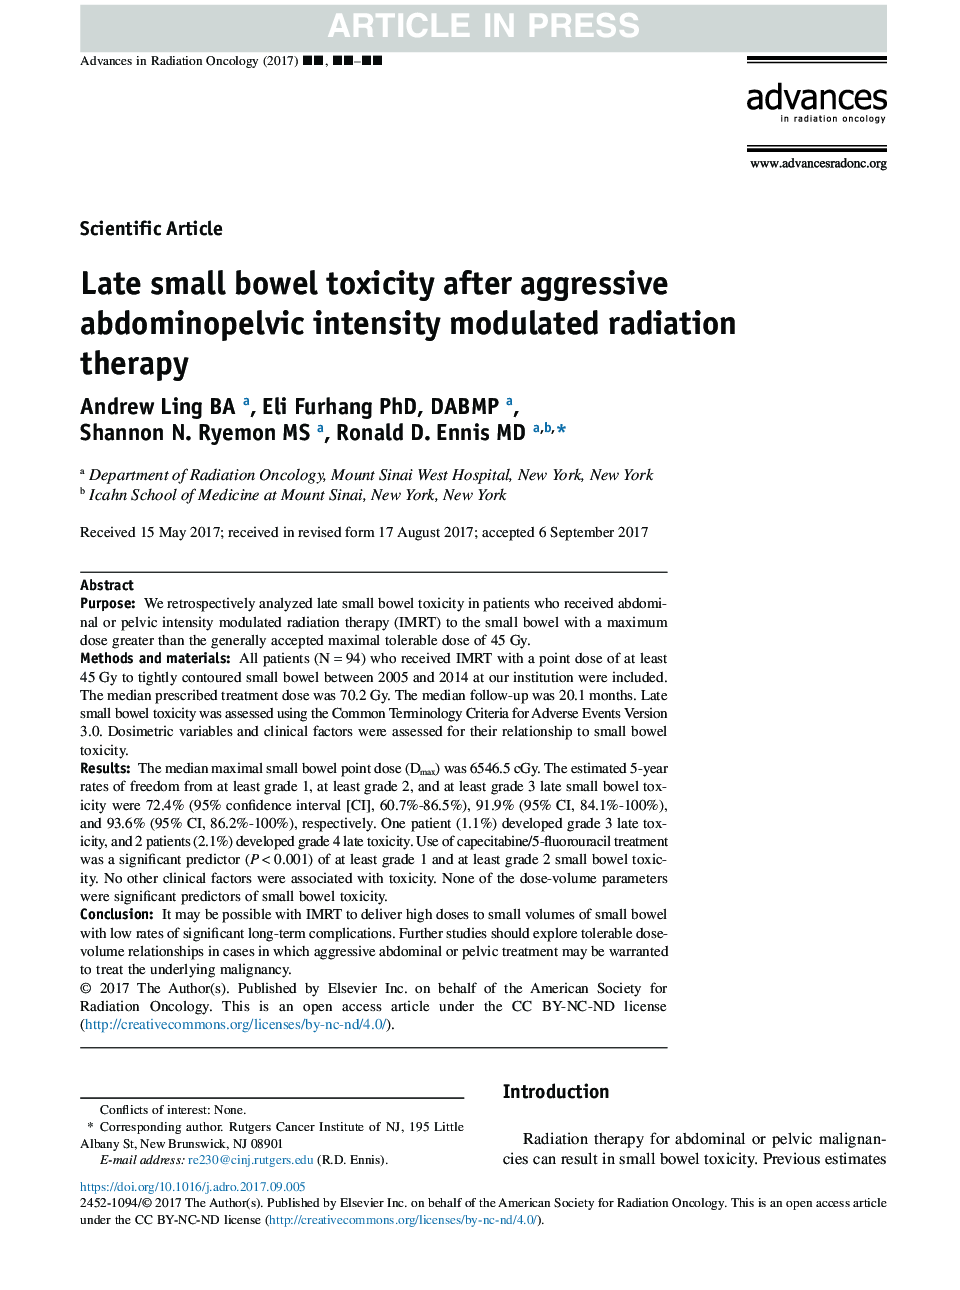 Late small bowel toxicity after aggressive abdominopelvic intensity modulated radiation therapy